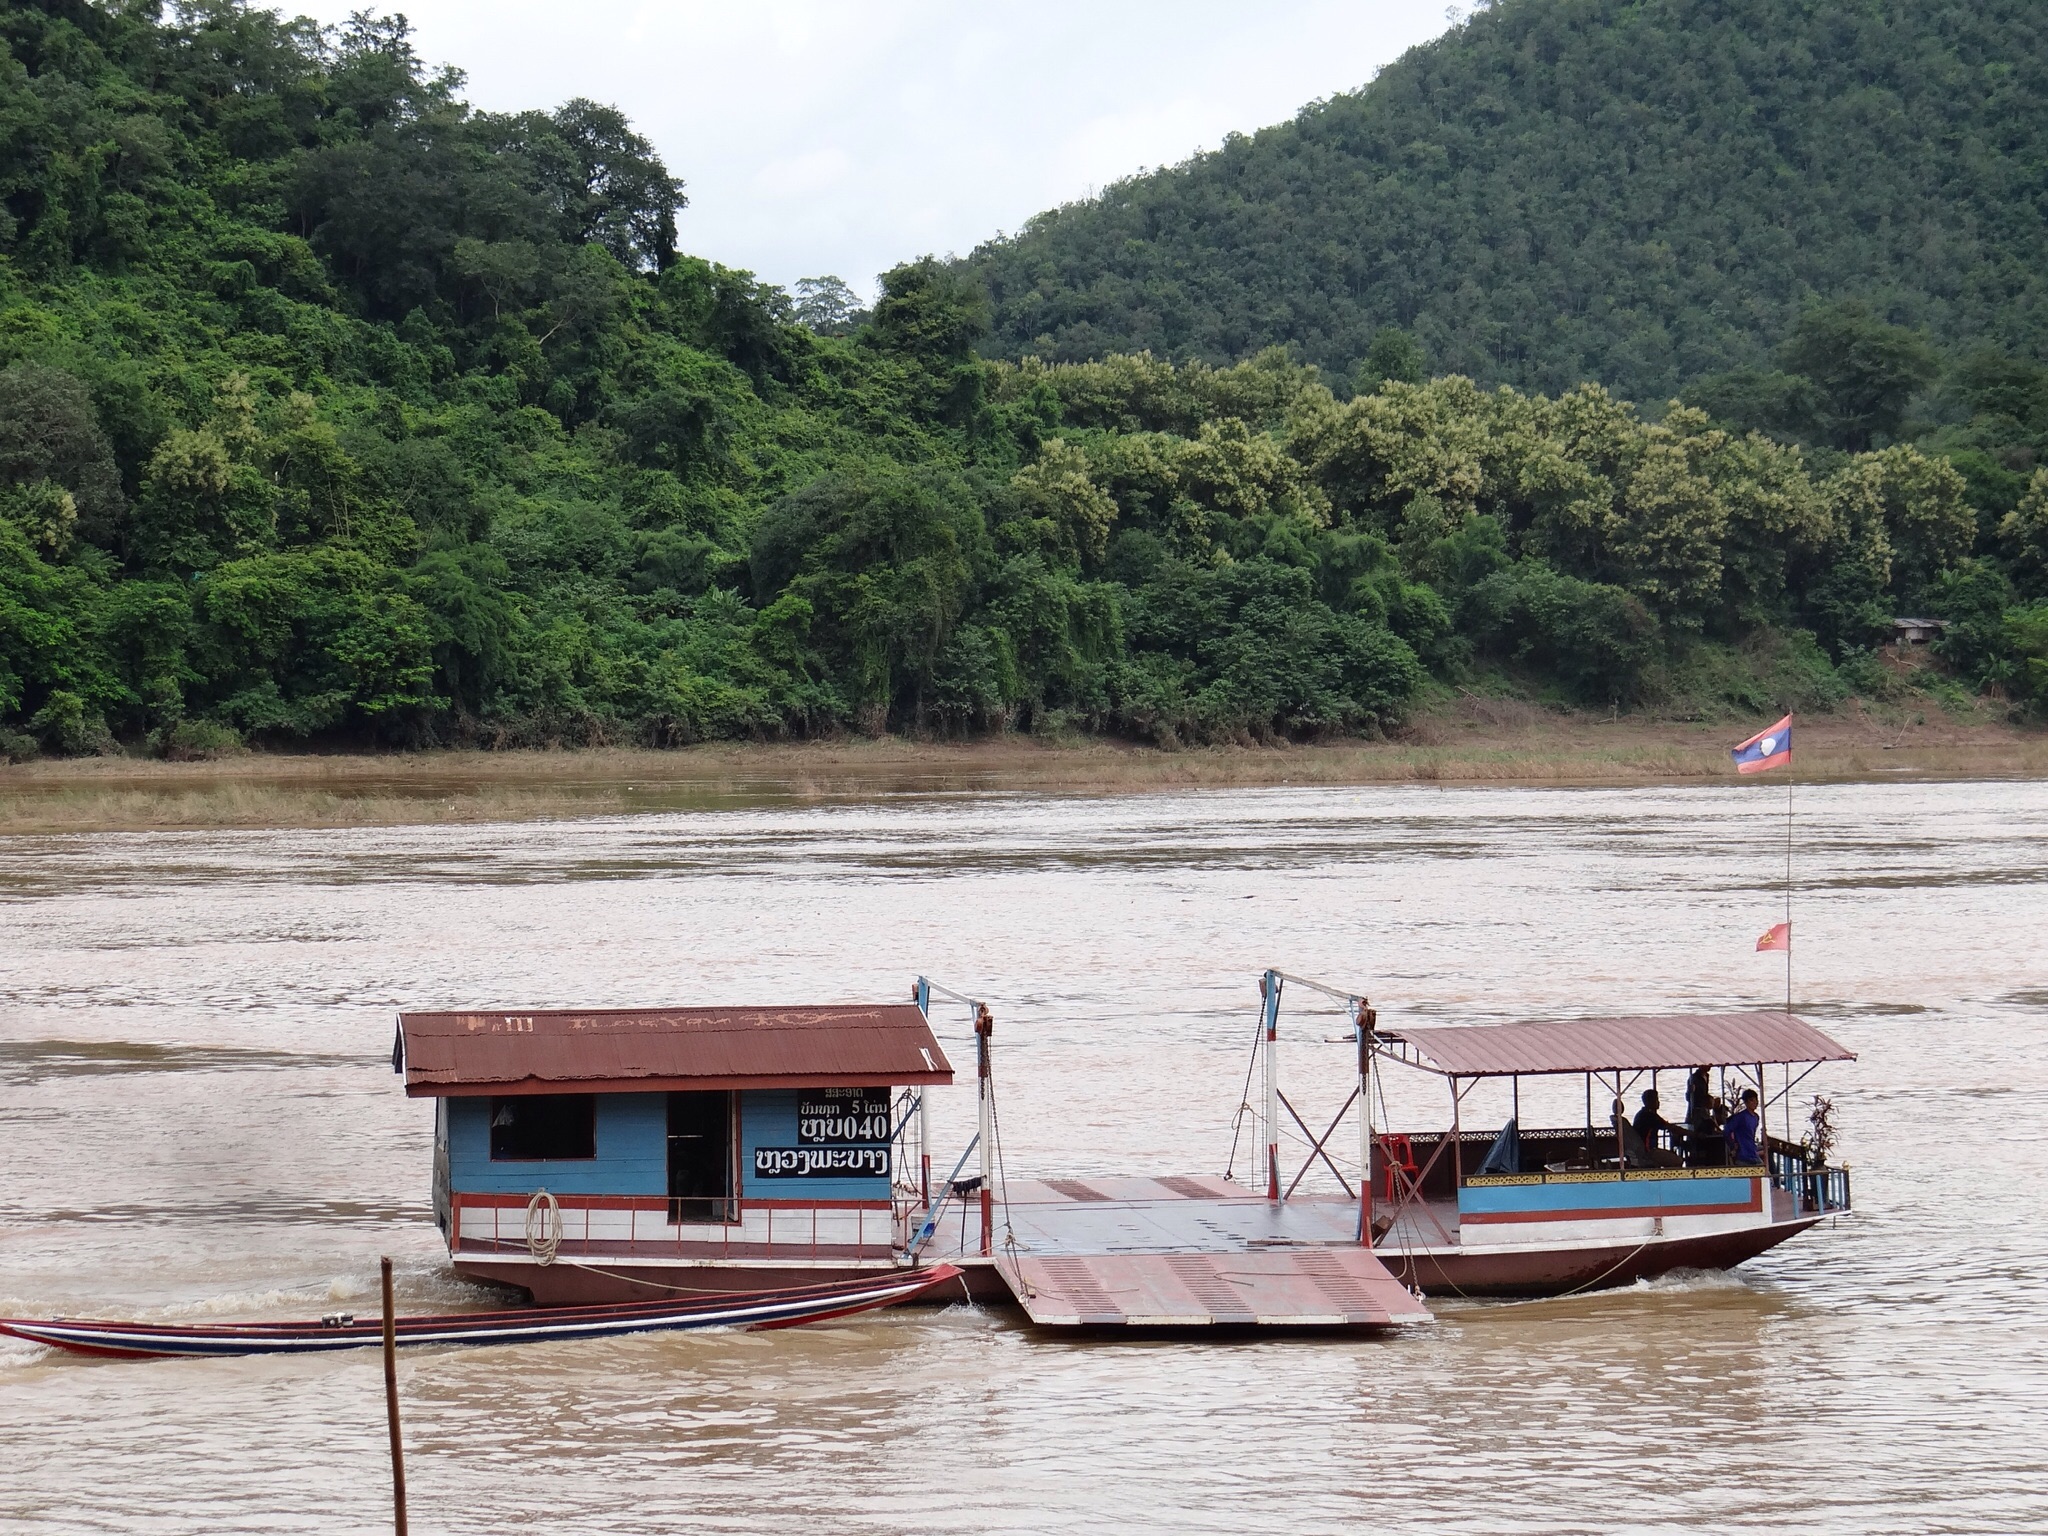 Ferry over Mekong river in Luang Prabang